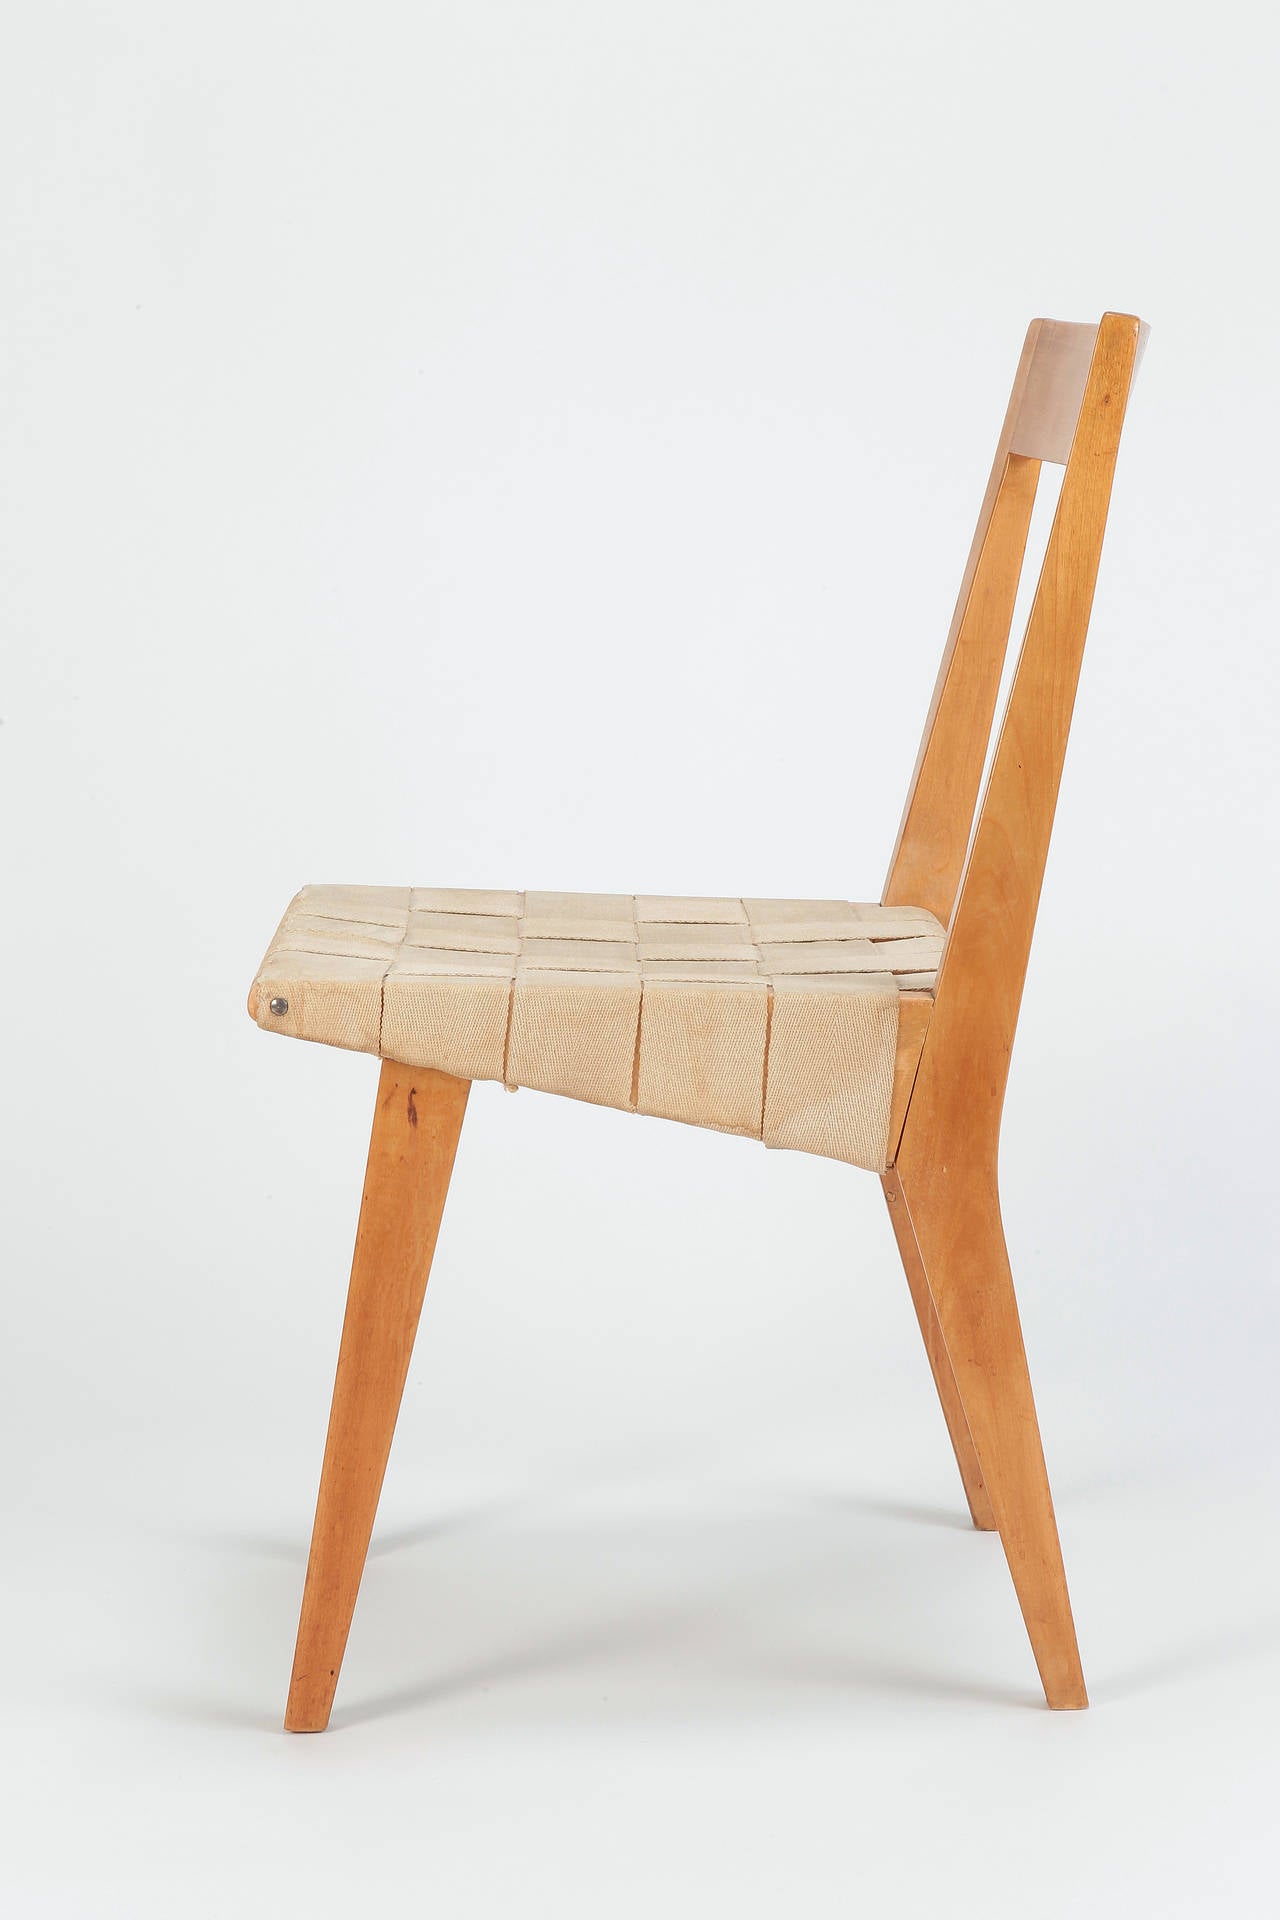 Very rare Jens Risom chair maufactured in the 1940s, model “666 WSP” of the 600 series from 1941. First production example from the 40s. Captivates with it’s simple form and material. Birch wood frame and original cotton webbing! Collectors item!